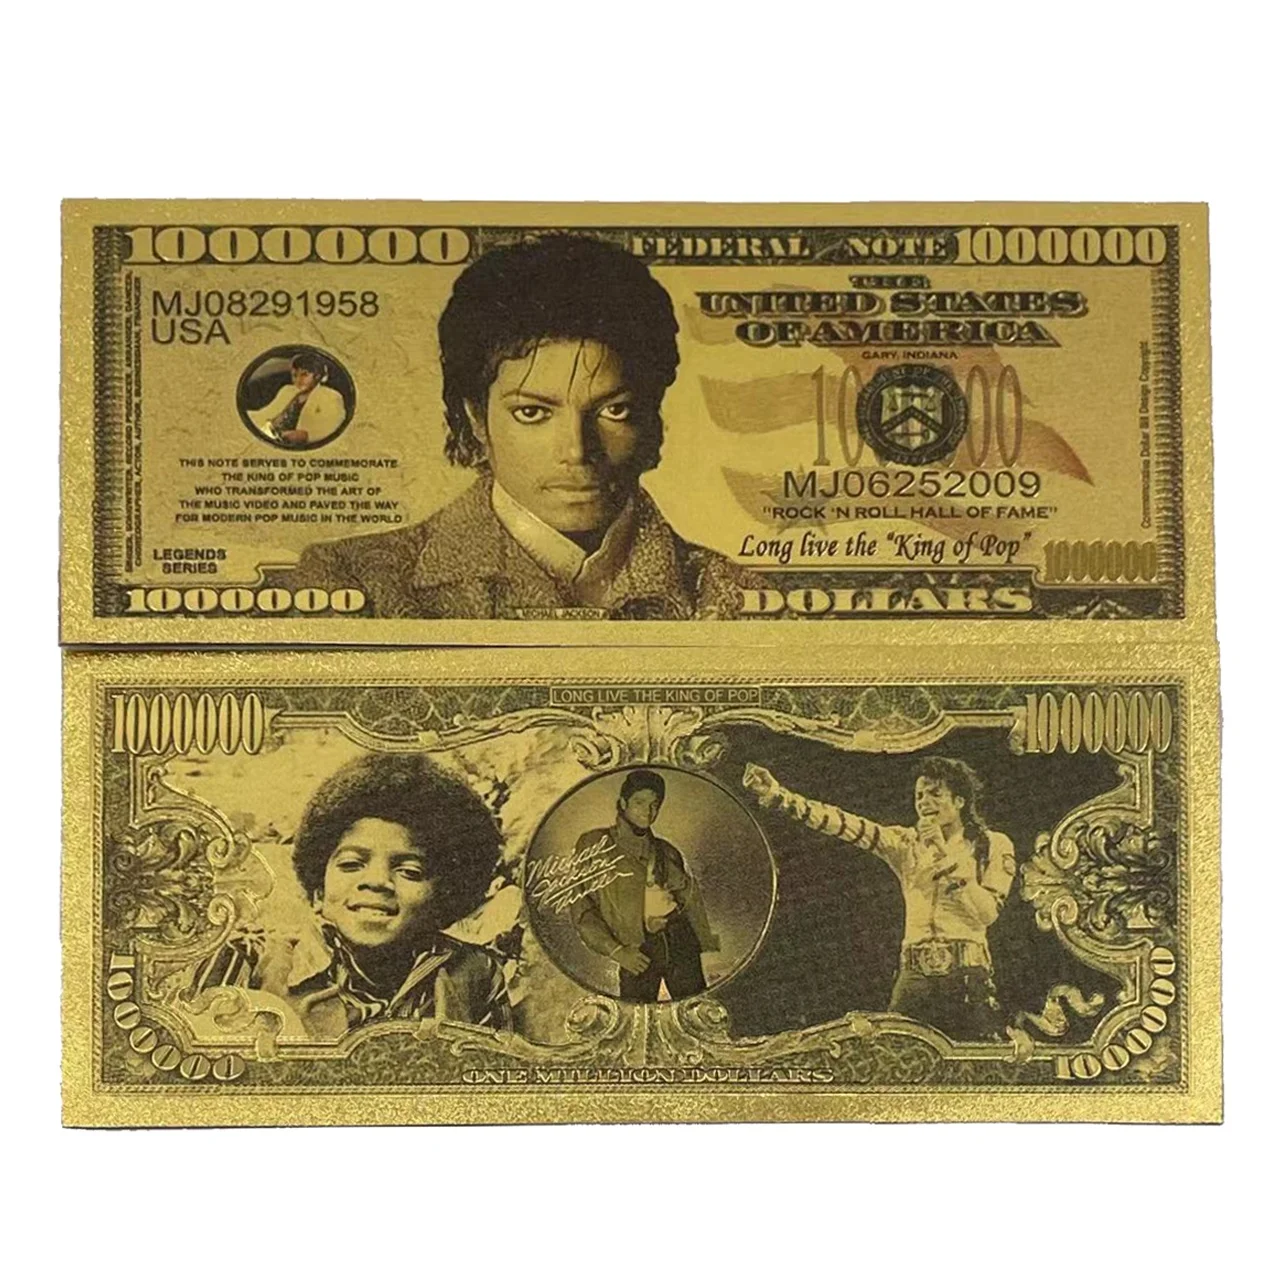 

personalize Michael jackson gold foil plastic card 1000000 US dollar gold banknote collect card movie prop money